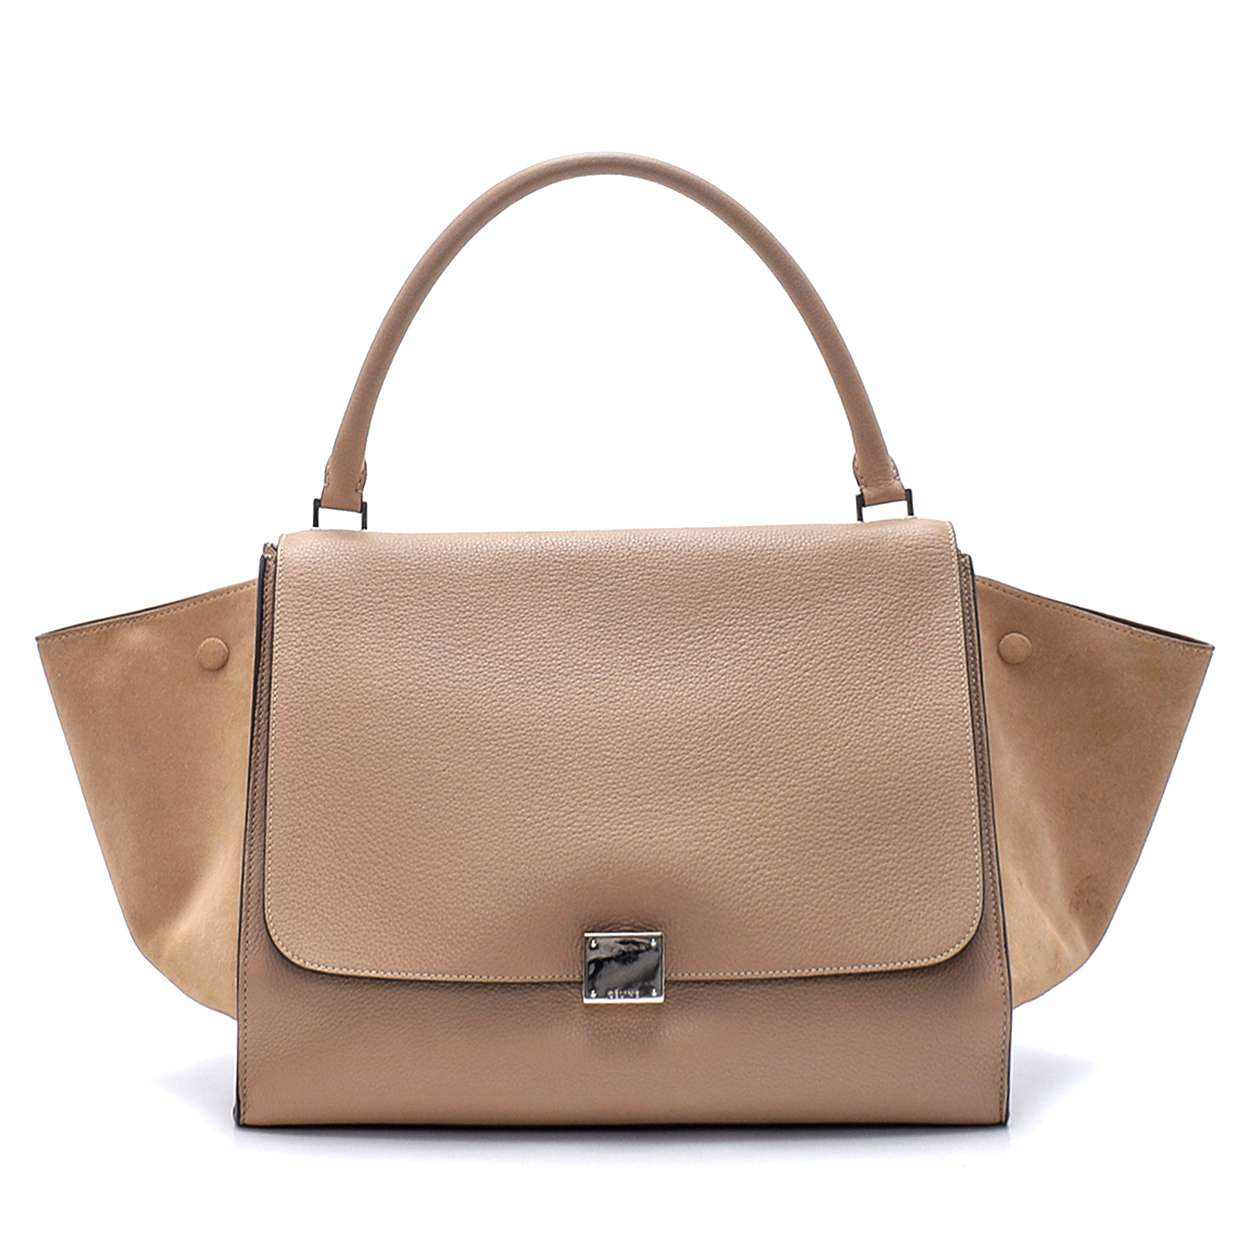 Celine - Beige Suede and  Leather Large Trapeze Bag